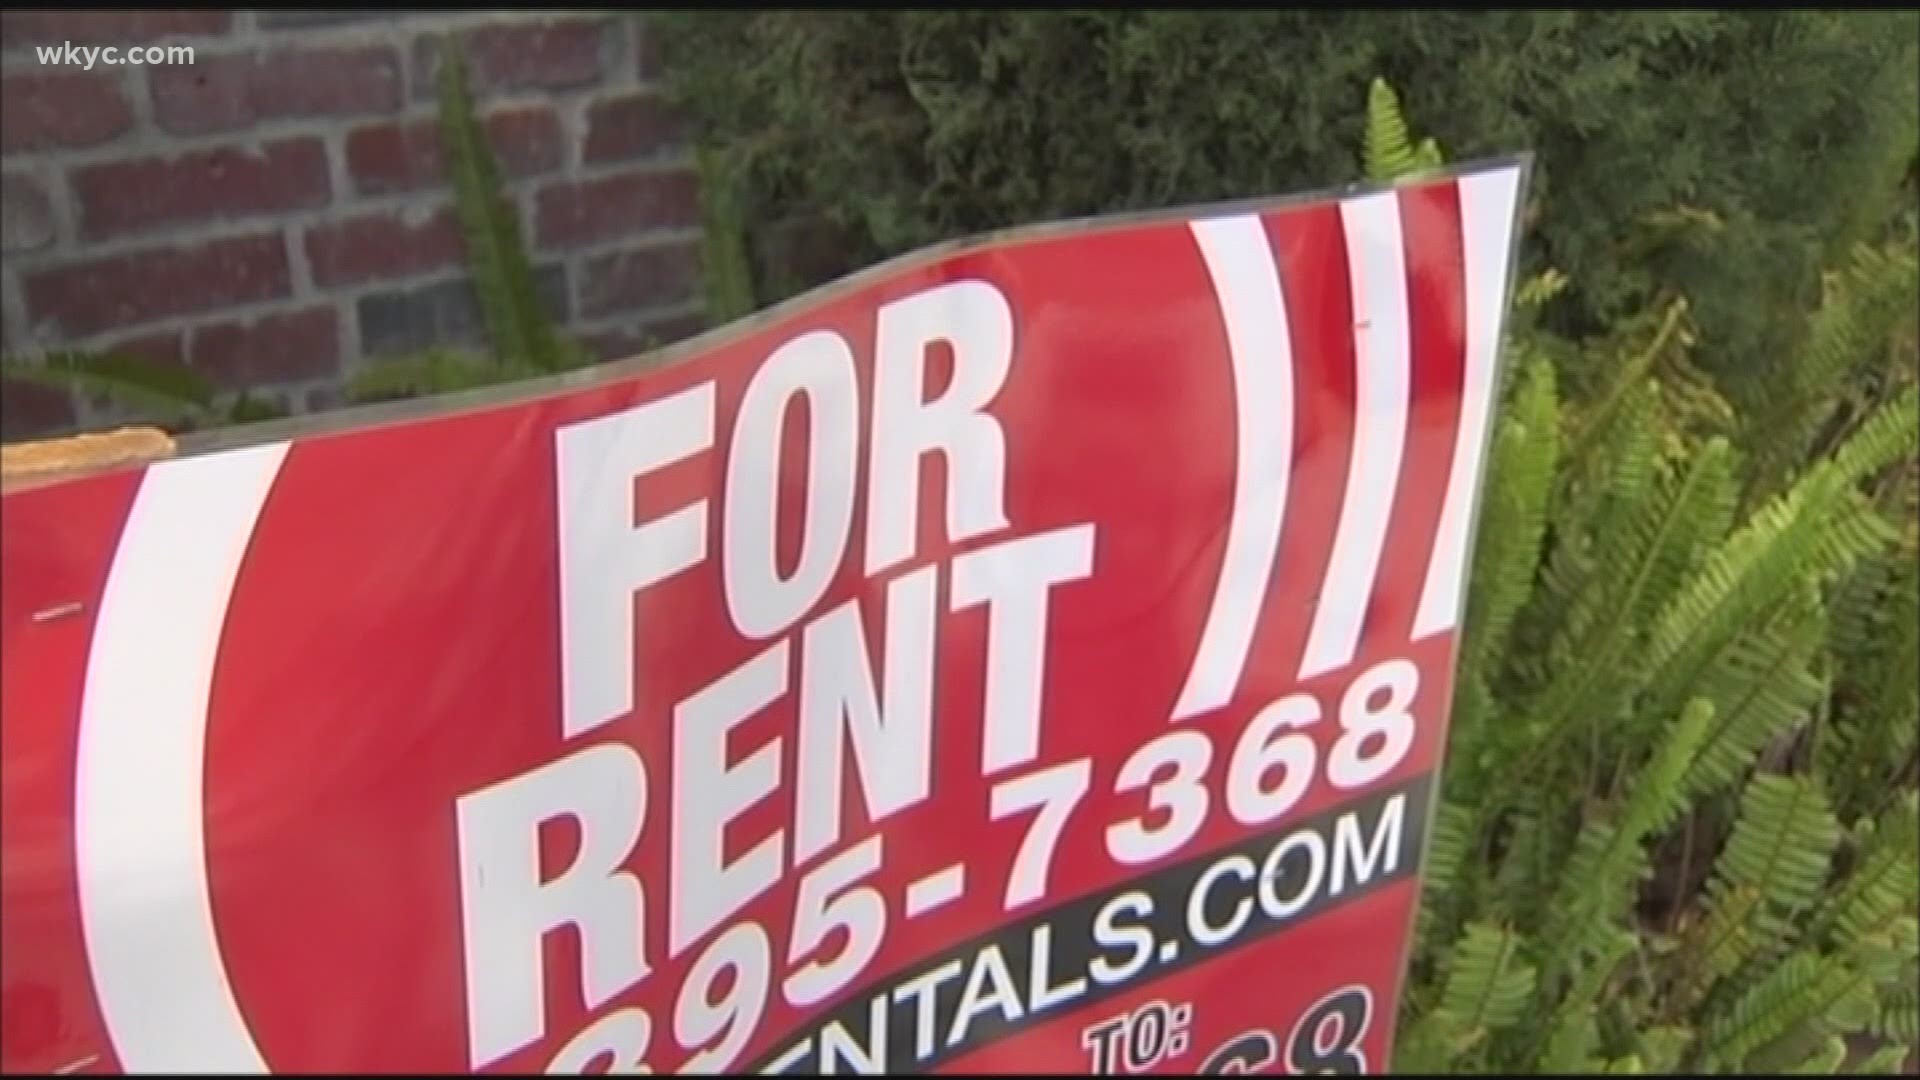 As more and more people flee cities nationwide, the suburban housing market and apartment rentals are seeing dramatic price changes.